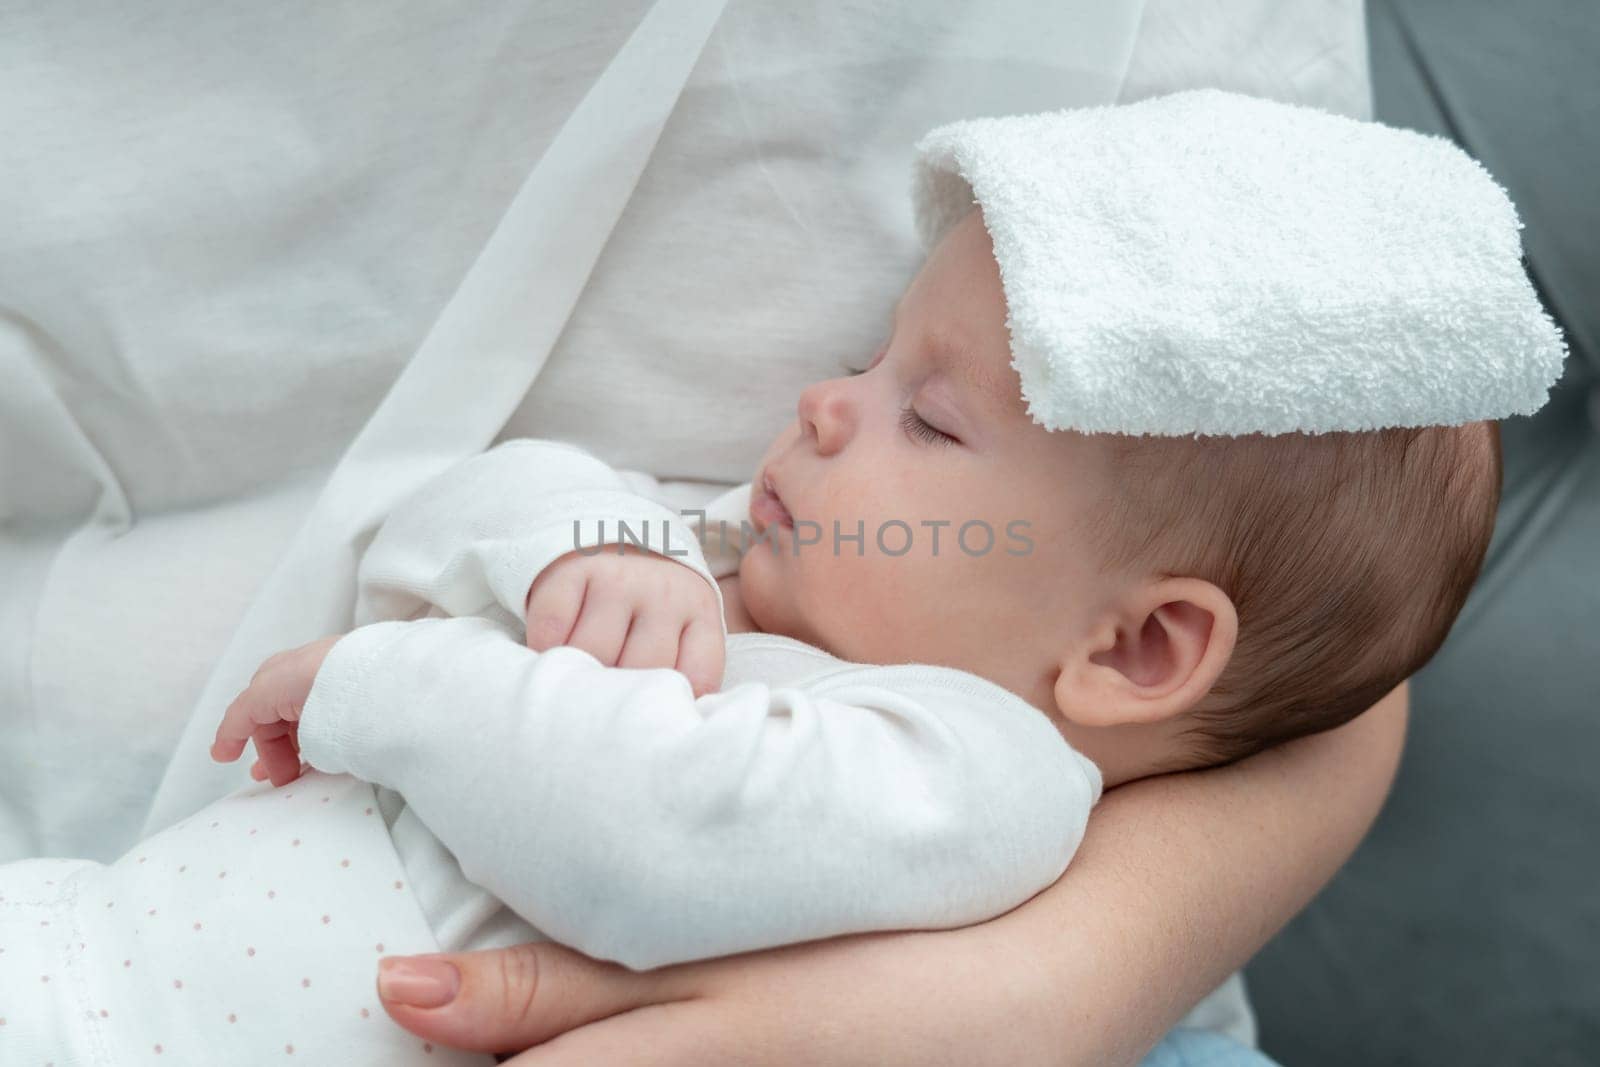 Mother gently places a wet towel on her baby's forehead, aiming to reduce the fever while holding